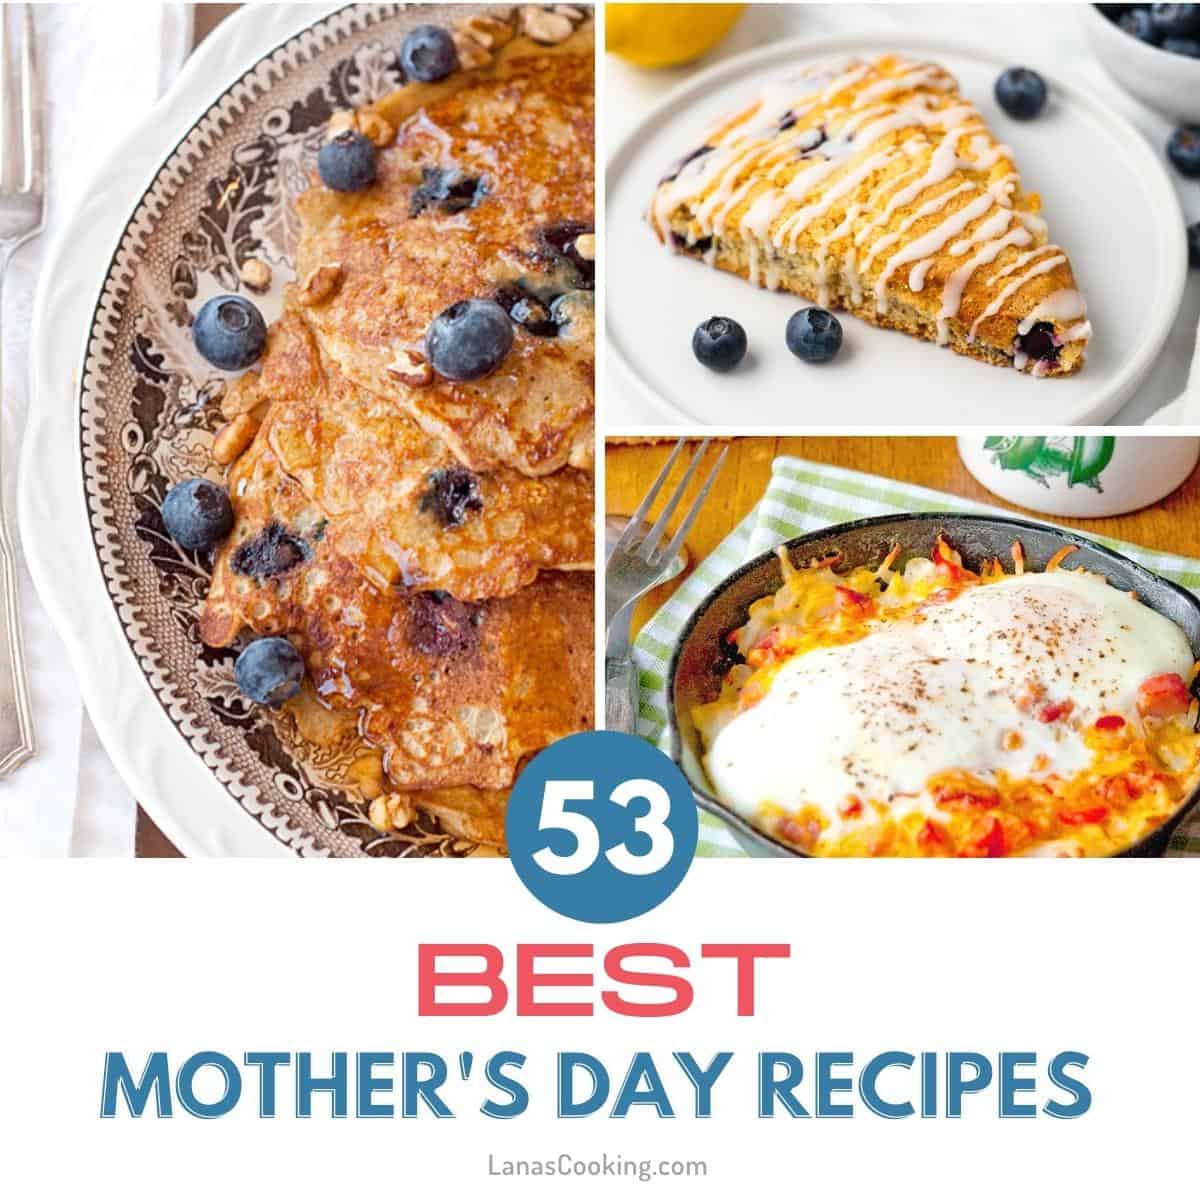 53 Best Mother’s Day Recipes